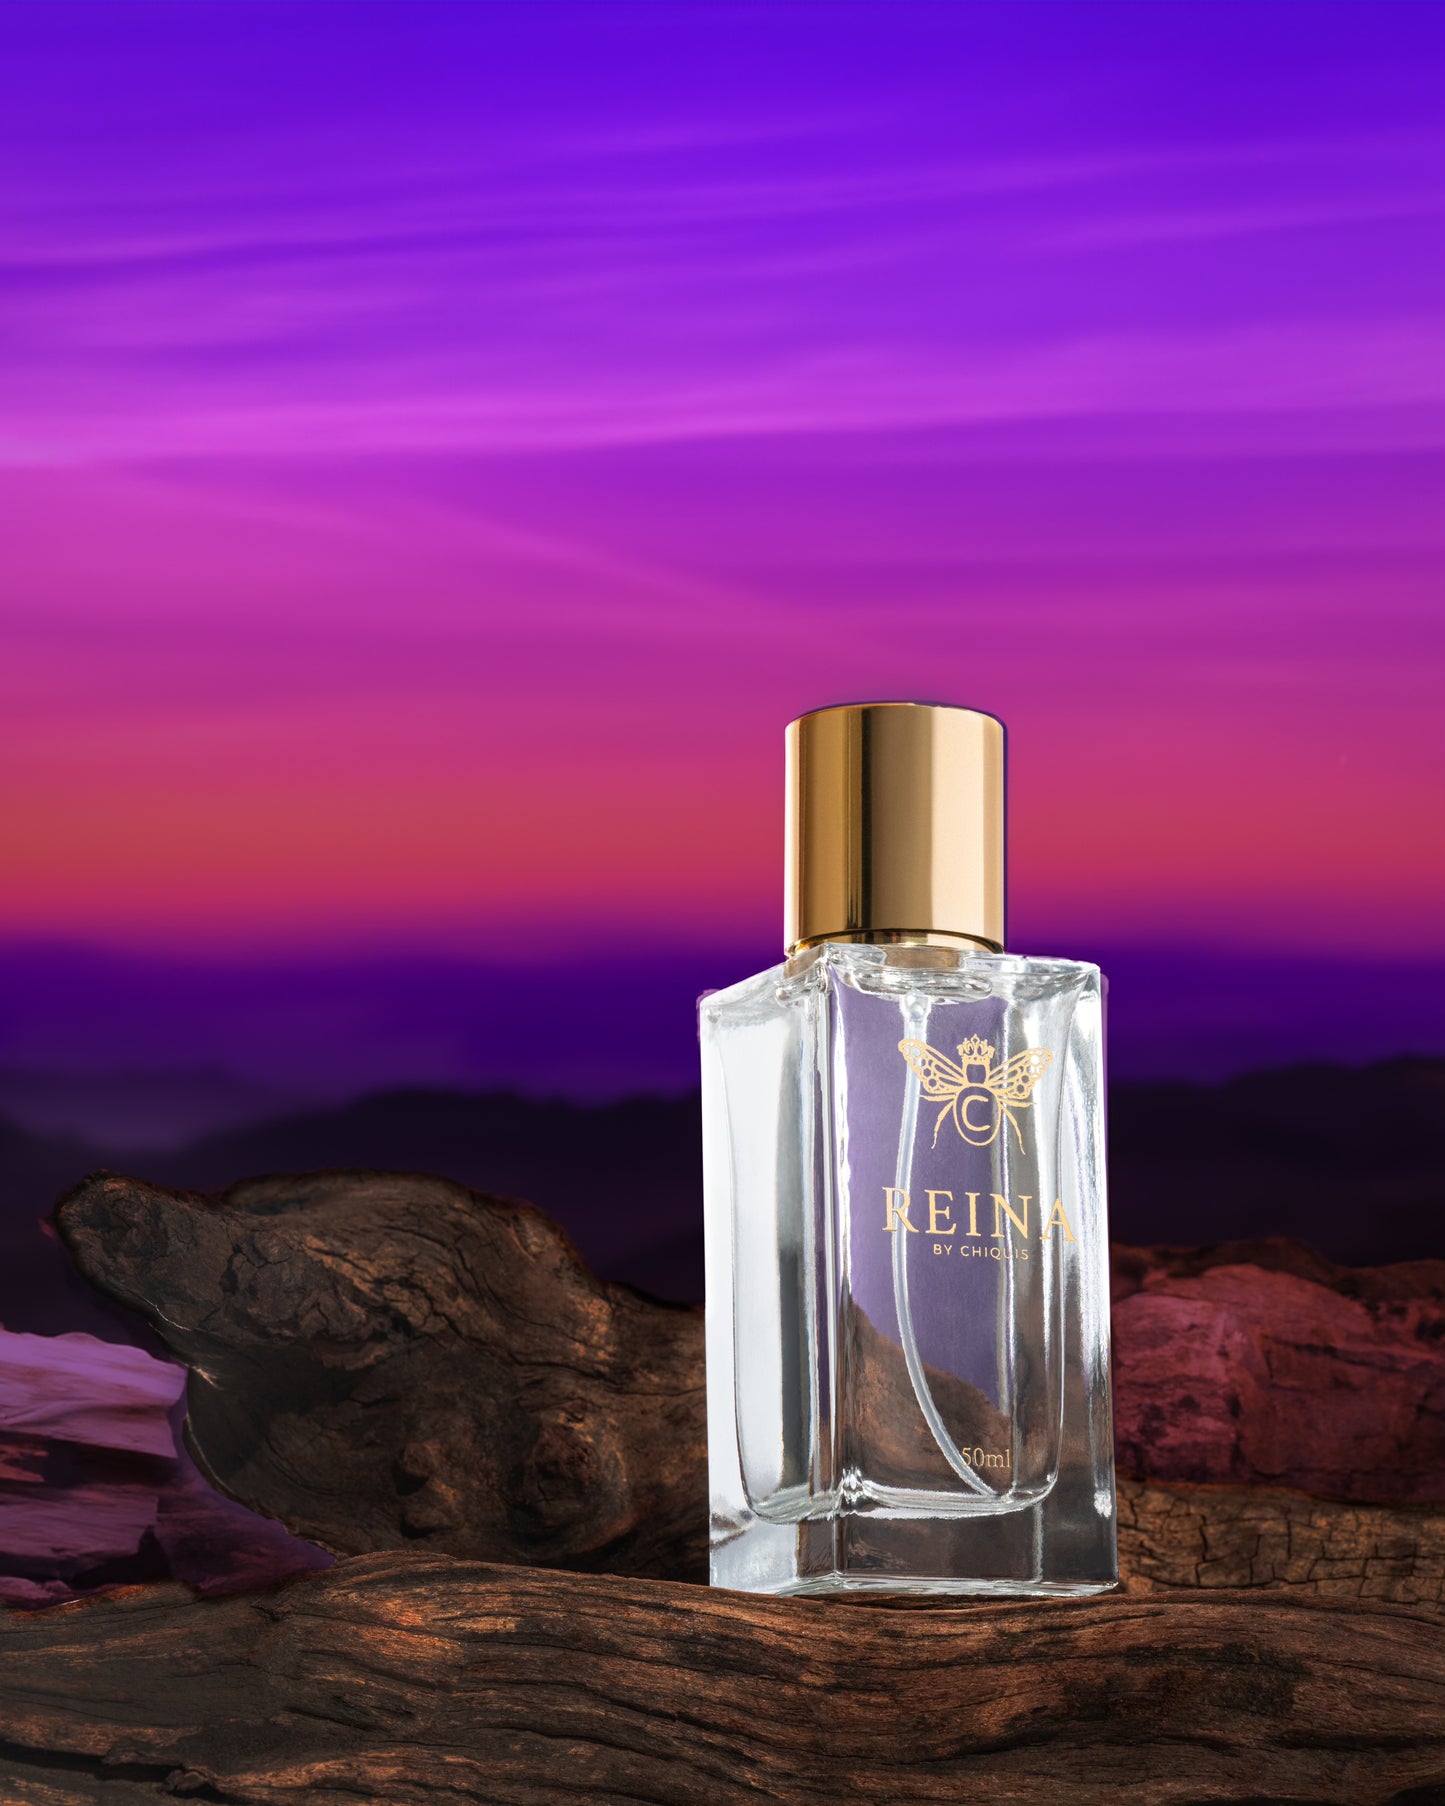 Reina Fragrance by Chiquis